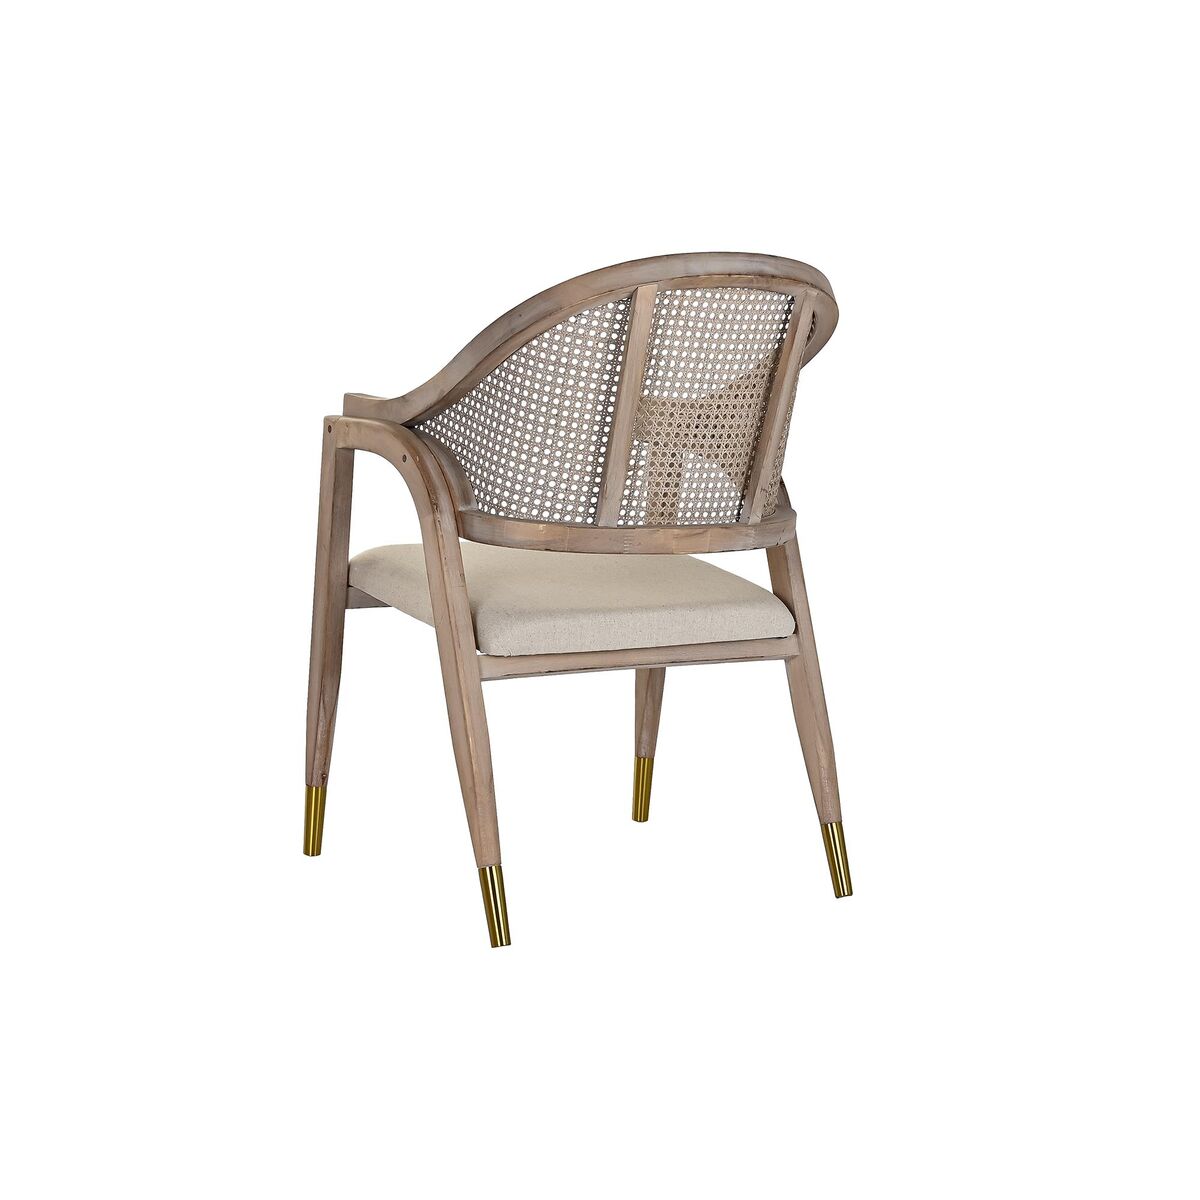 Chair with Armrests DKD Home Decor Beige Fir Polyester (59 x 55 x 88 cm)